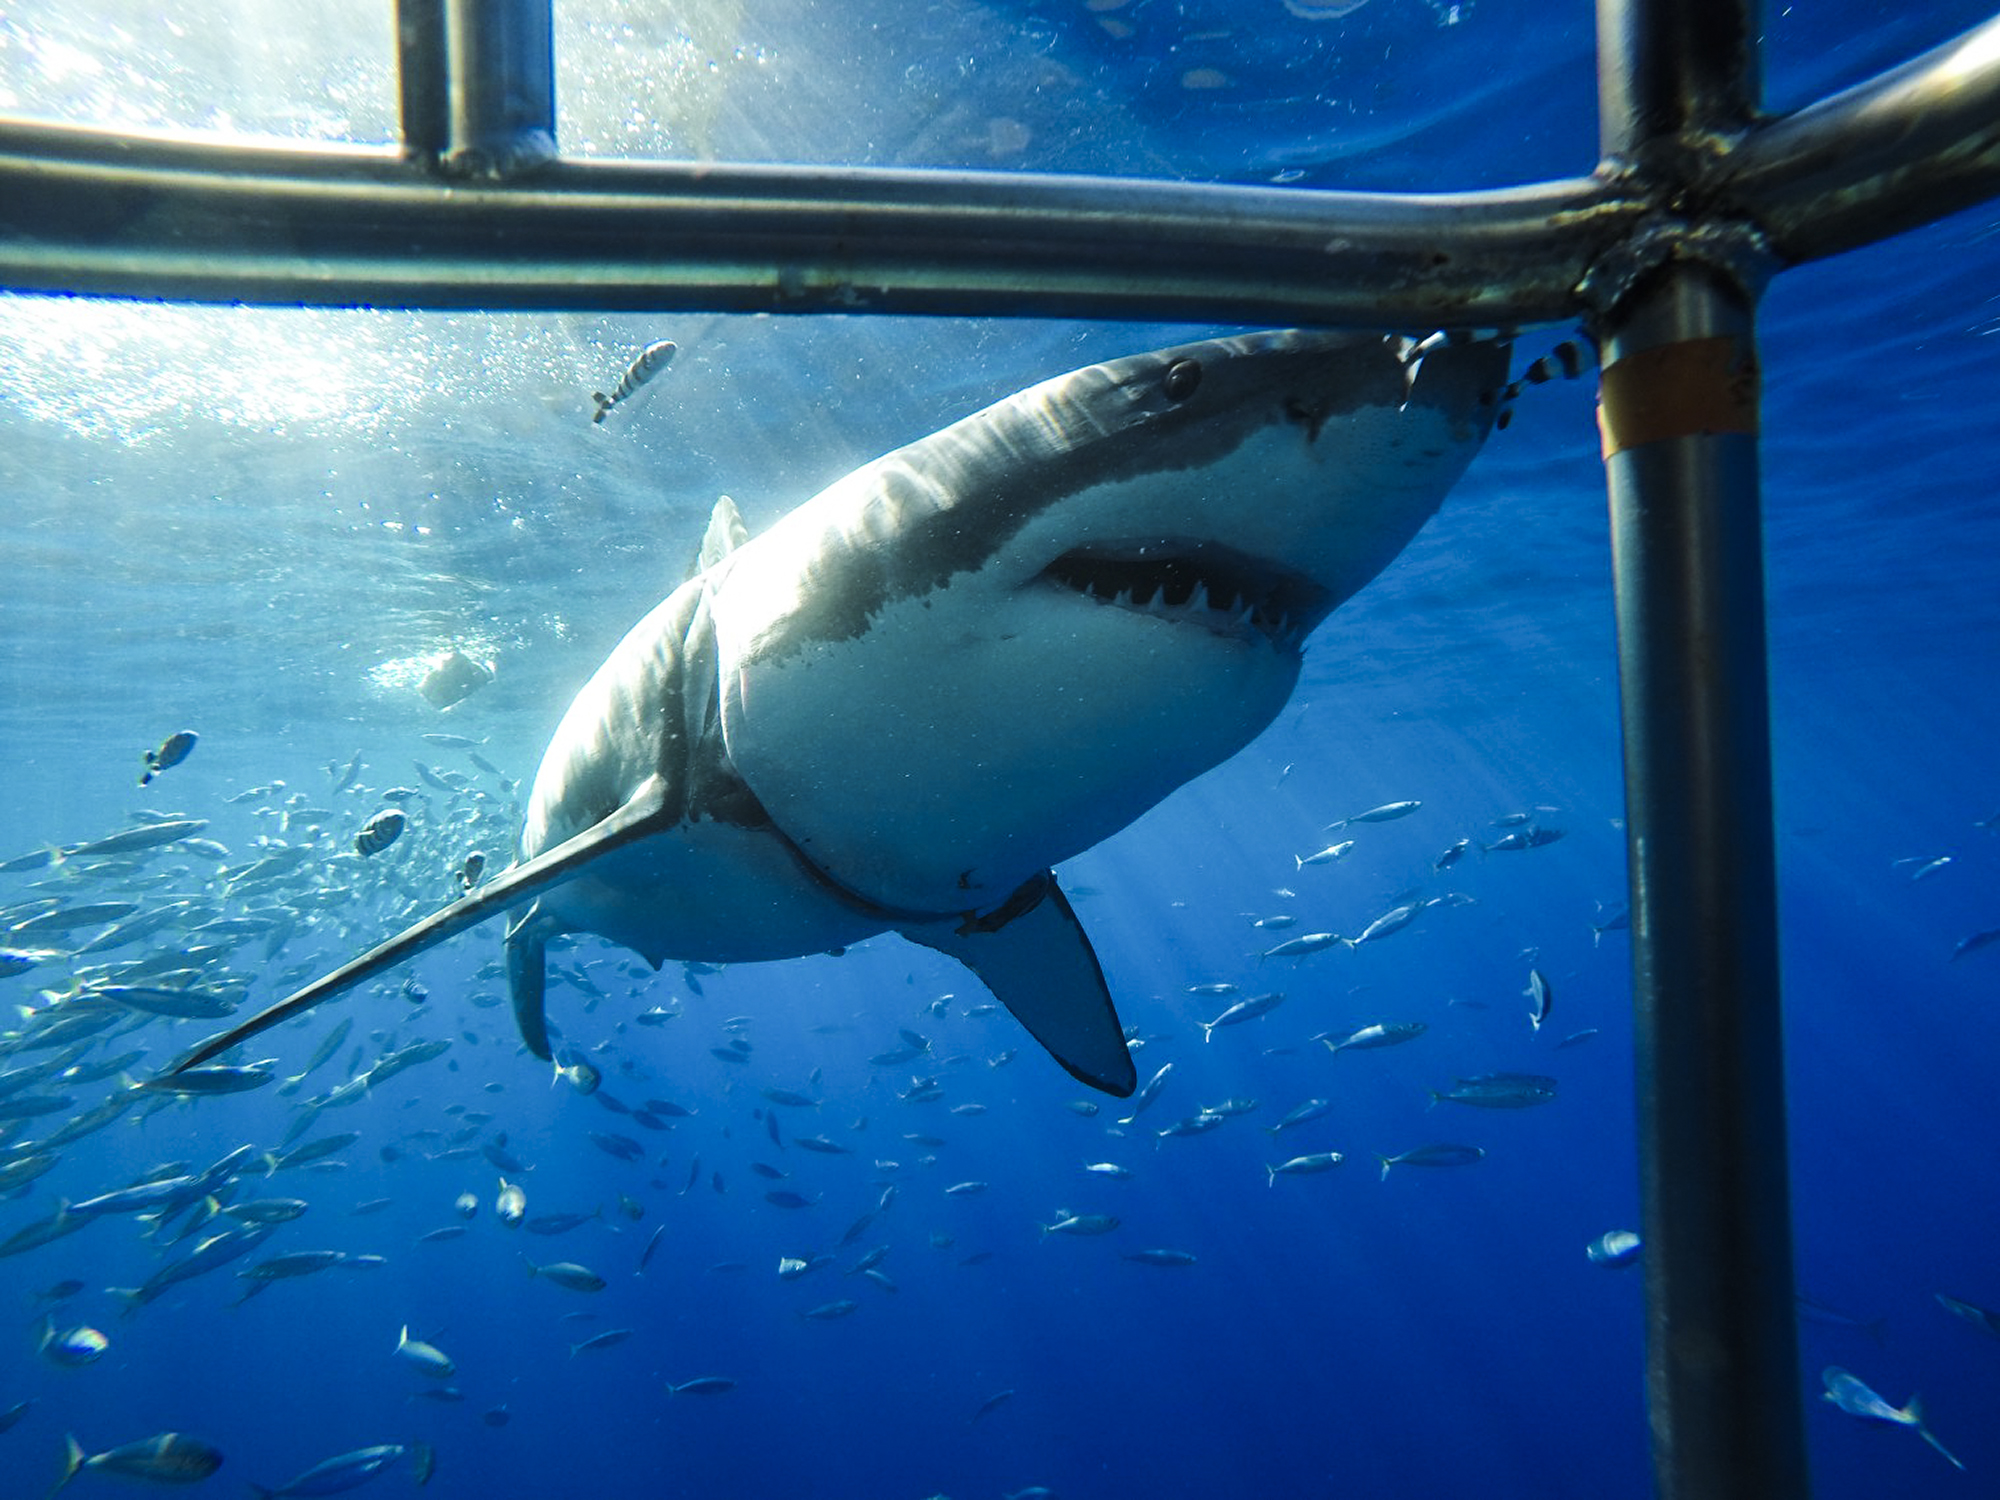 A curious great white checks out the cage in Guadalupe